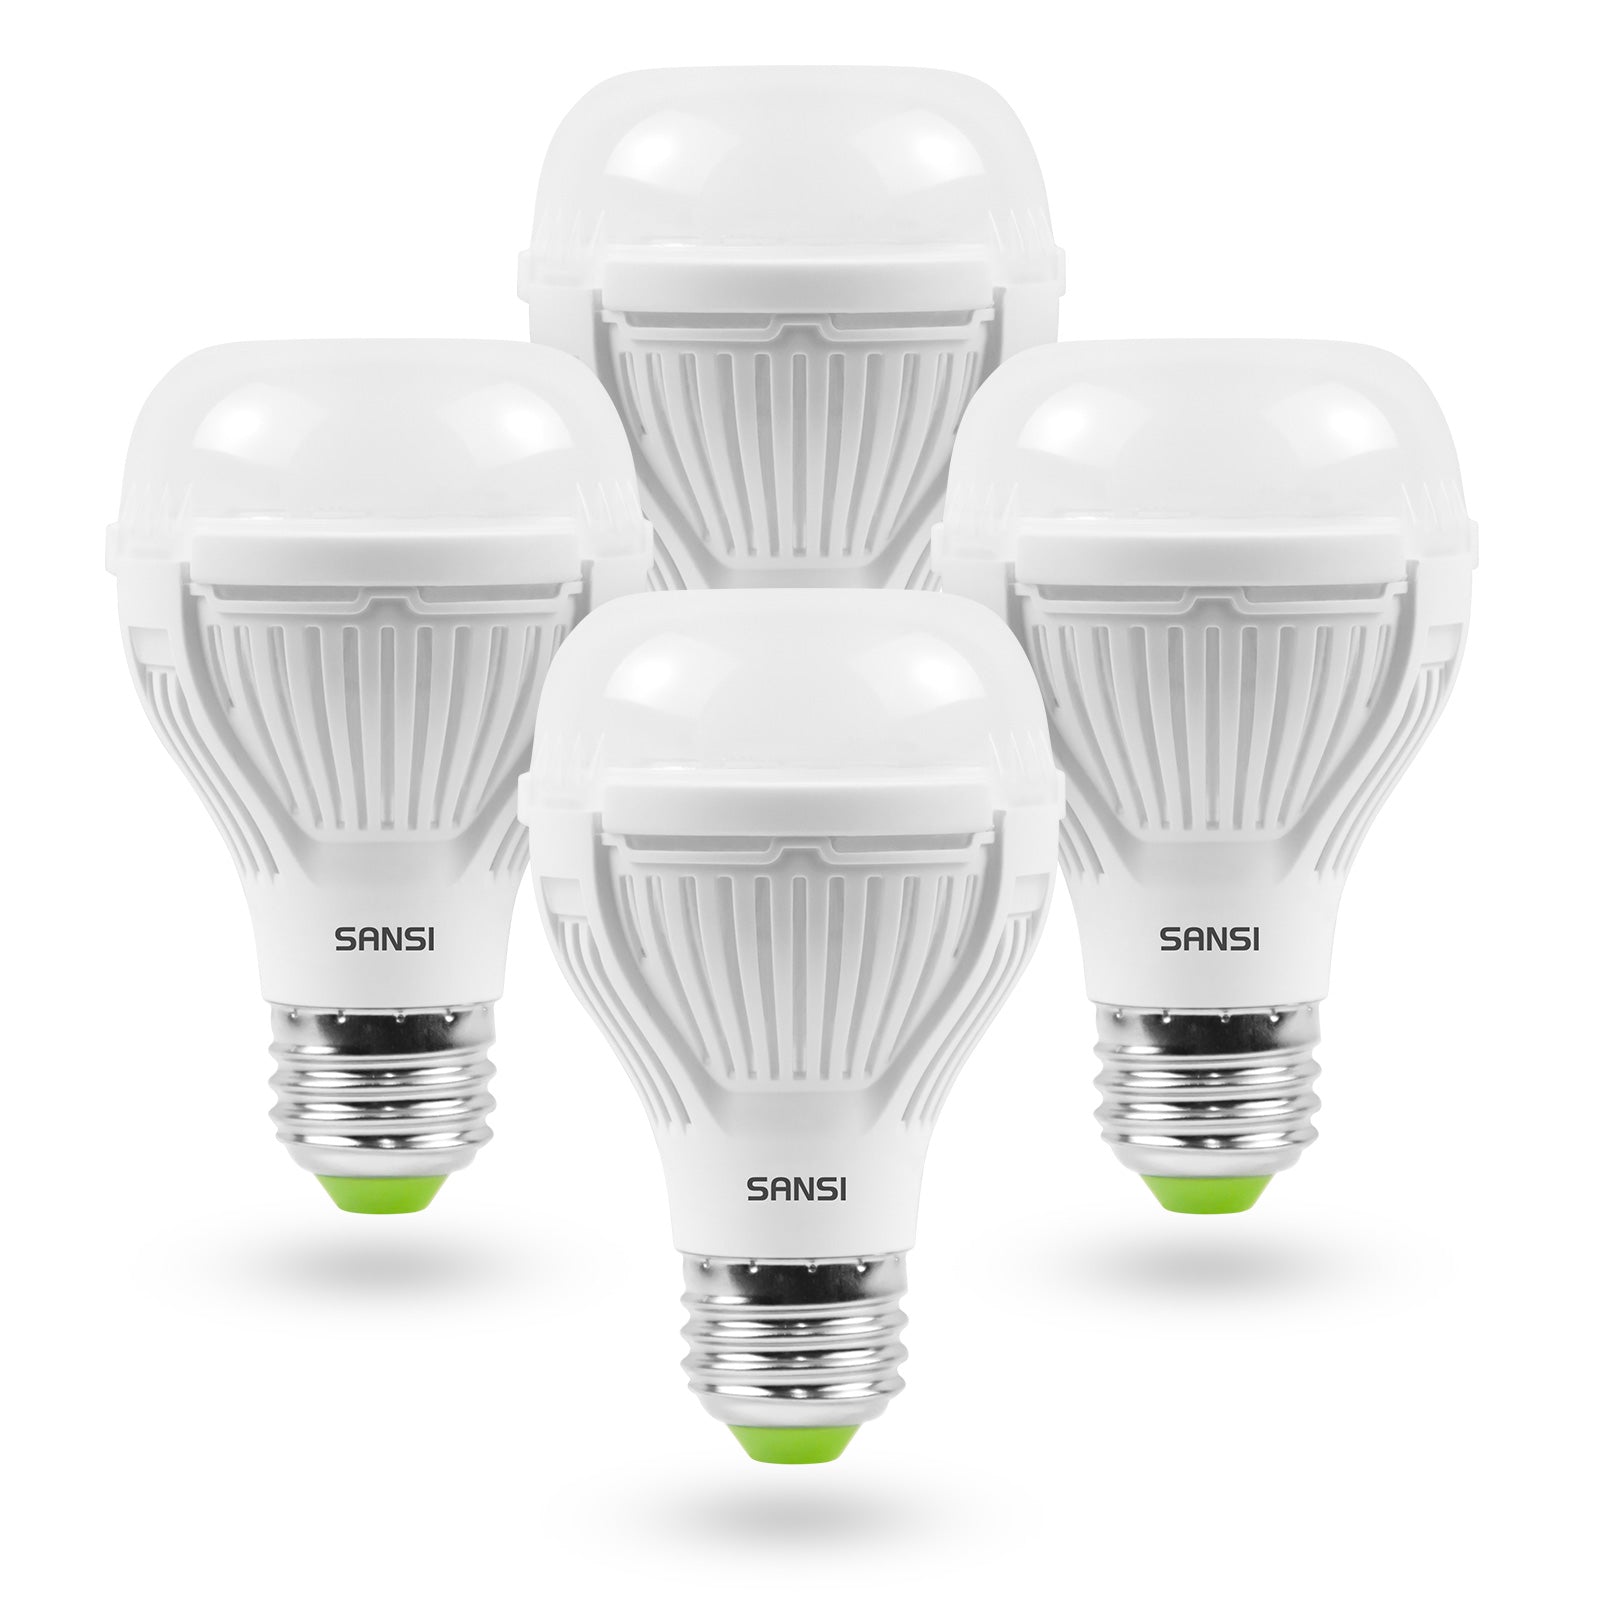 Upgraded A19 13W led light bulb with energy efficient for bedroom, 4 pack